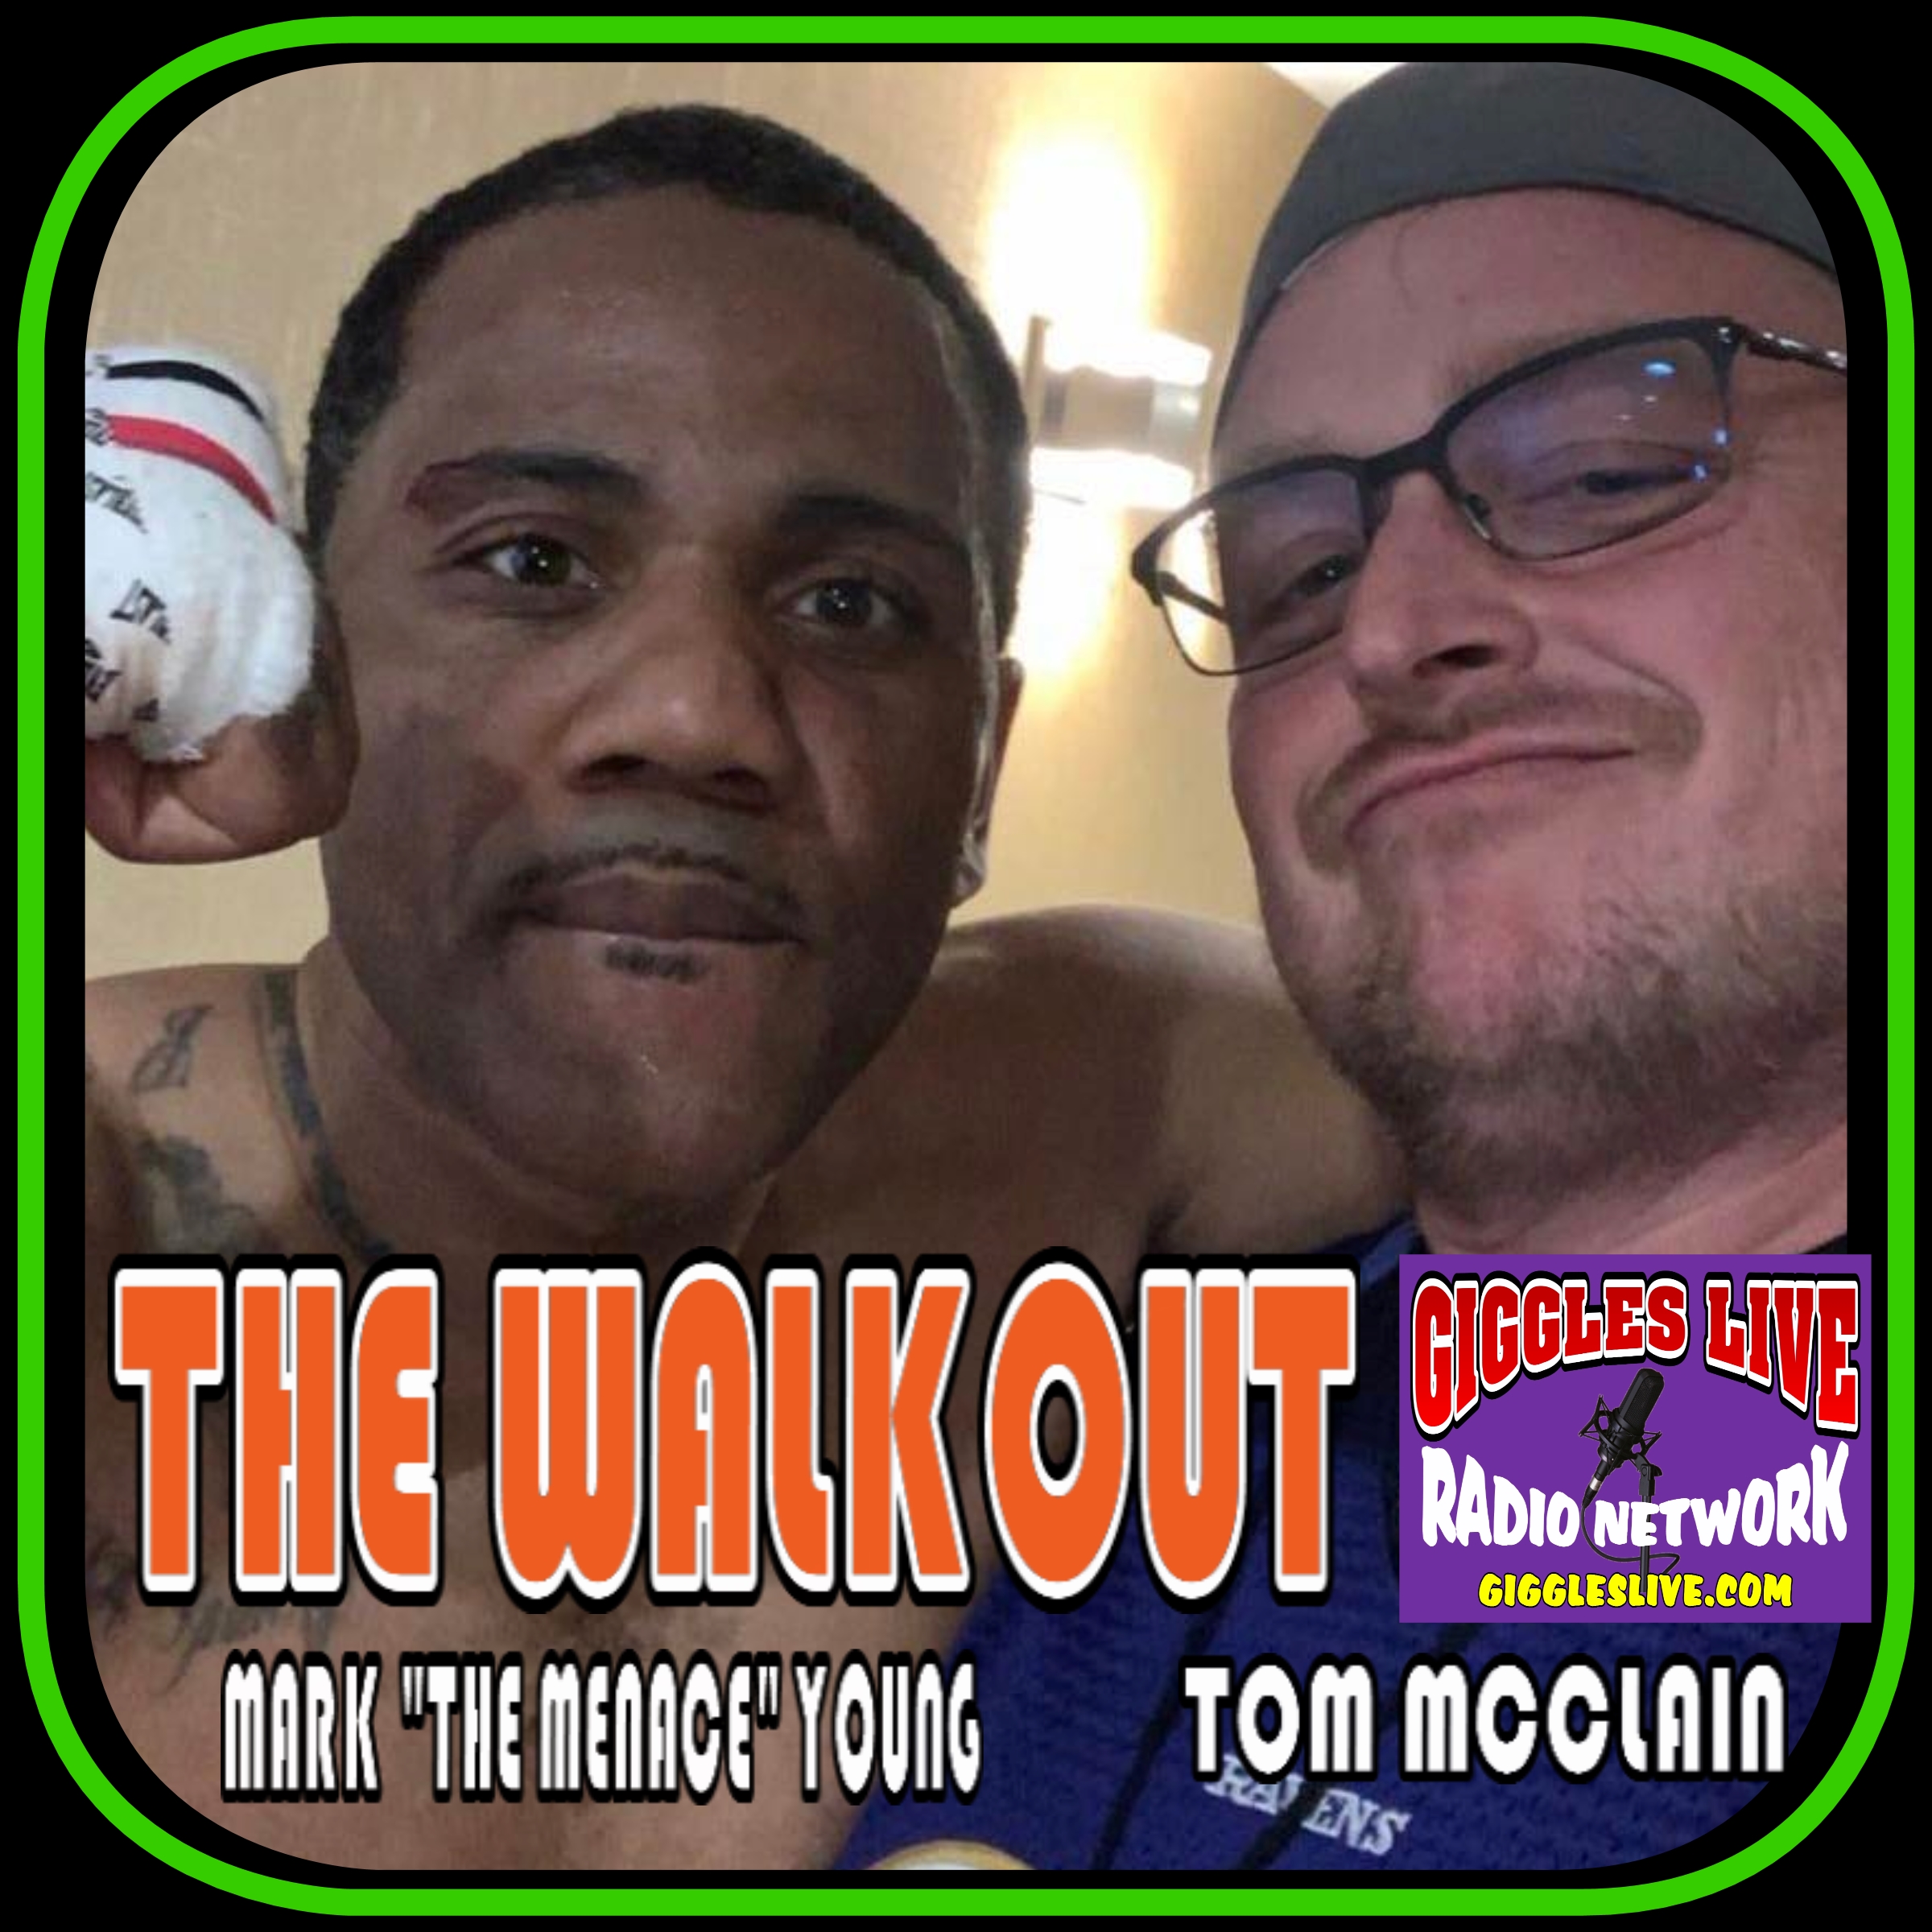 Art for The Walkout by Mark "The Menace" Young and Big Tom McClain with guest Chris Beal